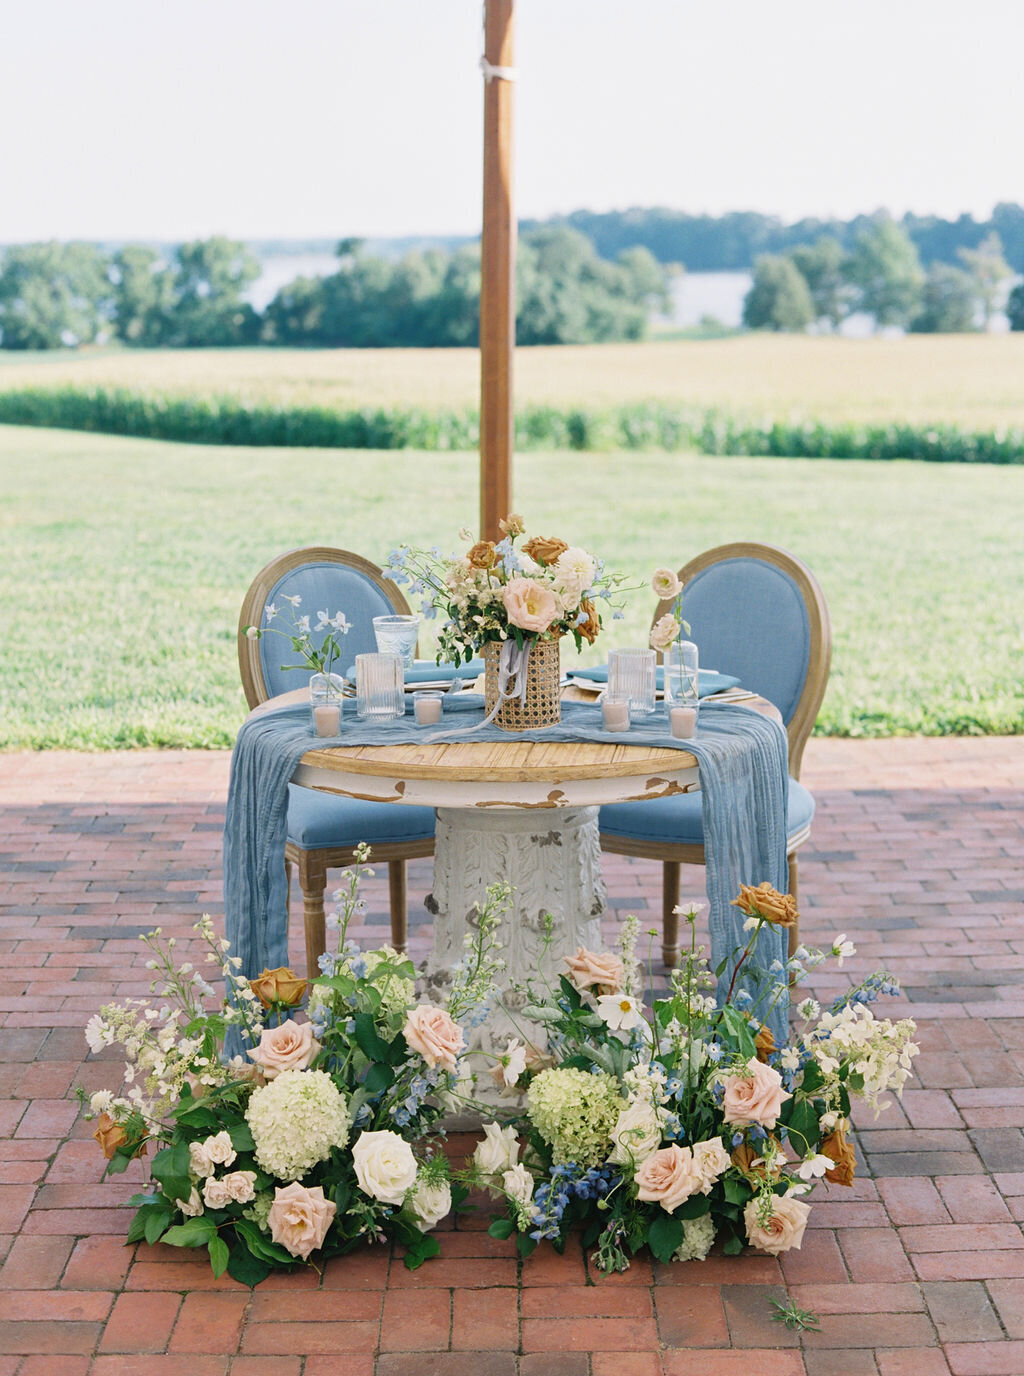 Sweetheart table with bridal bouquet, candles and ground arrangements in front of it with florals to include green hydrangea, blue delphinium, toffee roses, blush garden roses, and white cosmos.